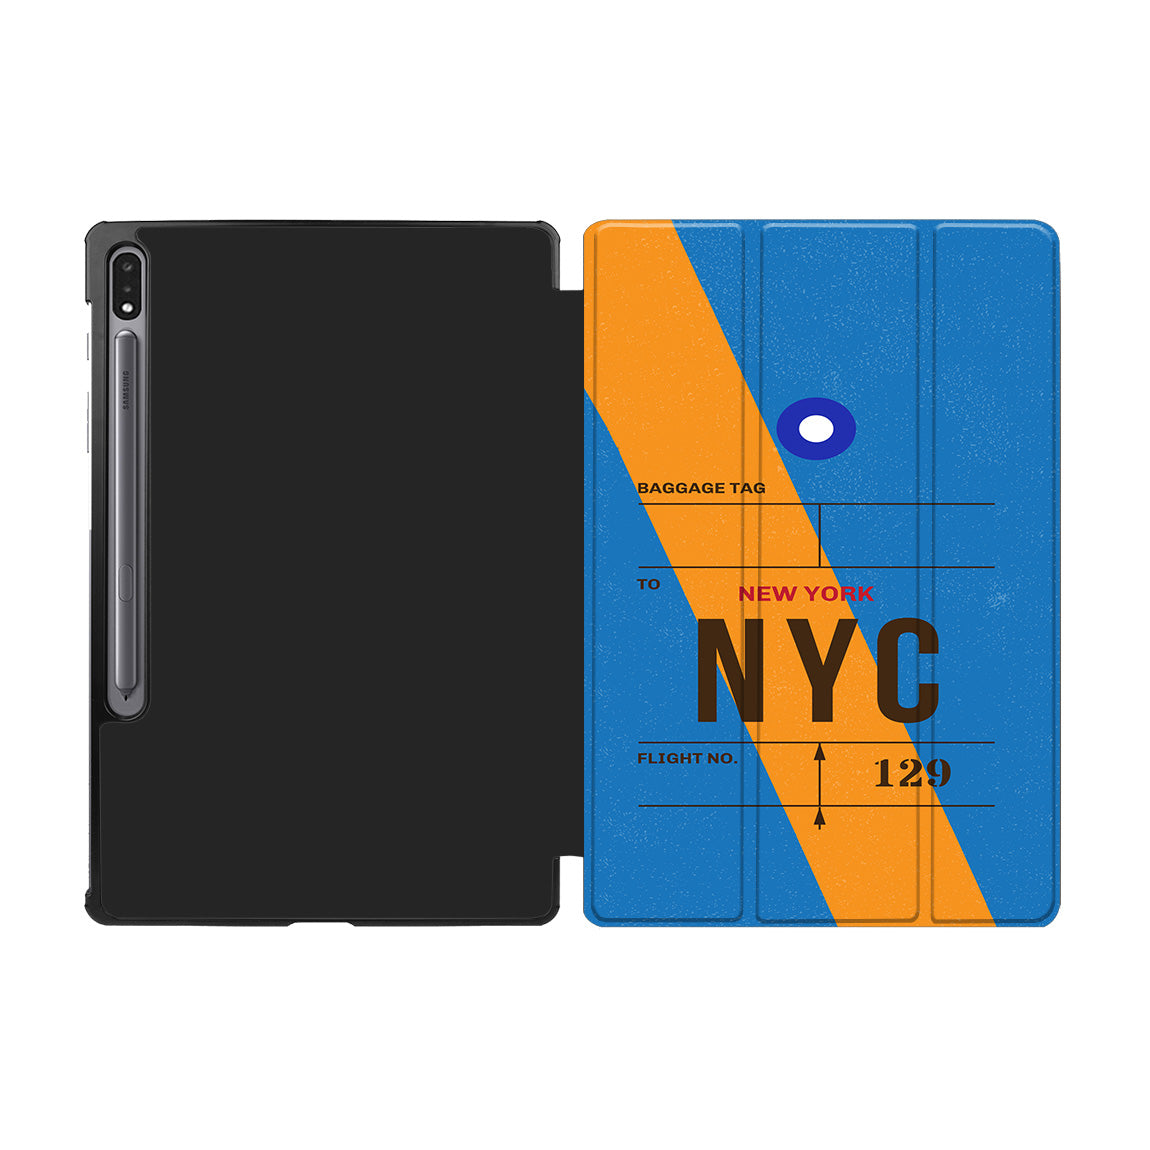 NYC - New York Luggage Tag Designed Samsung Tablet Cases